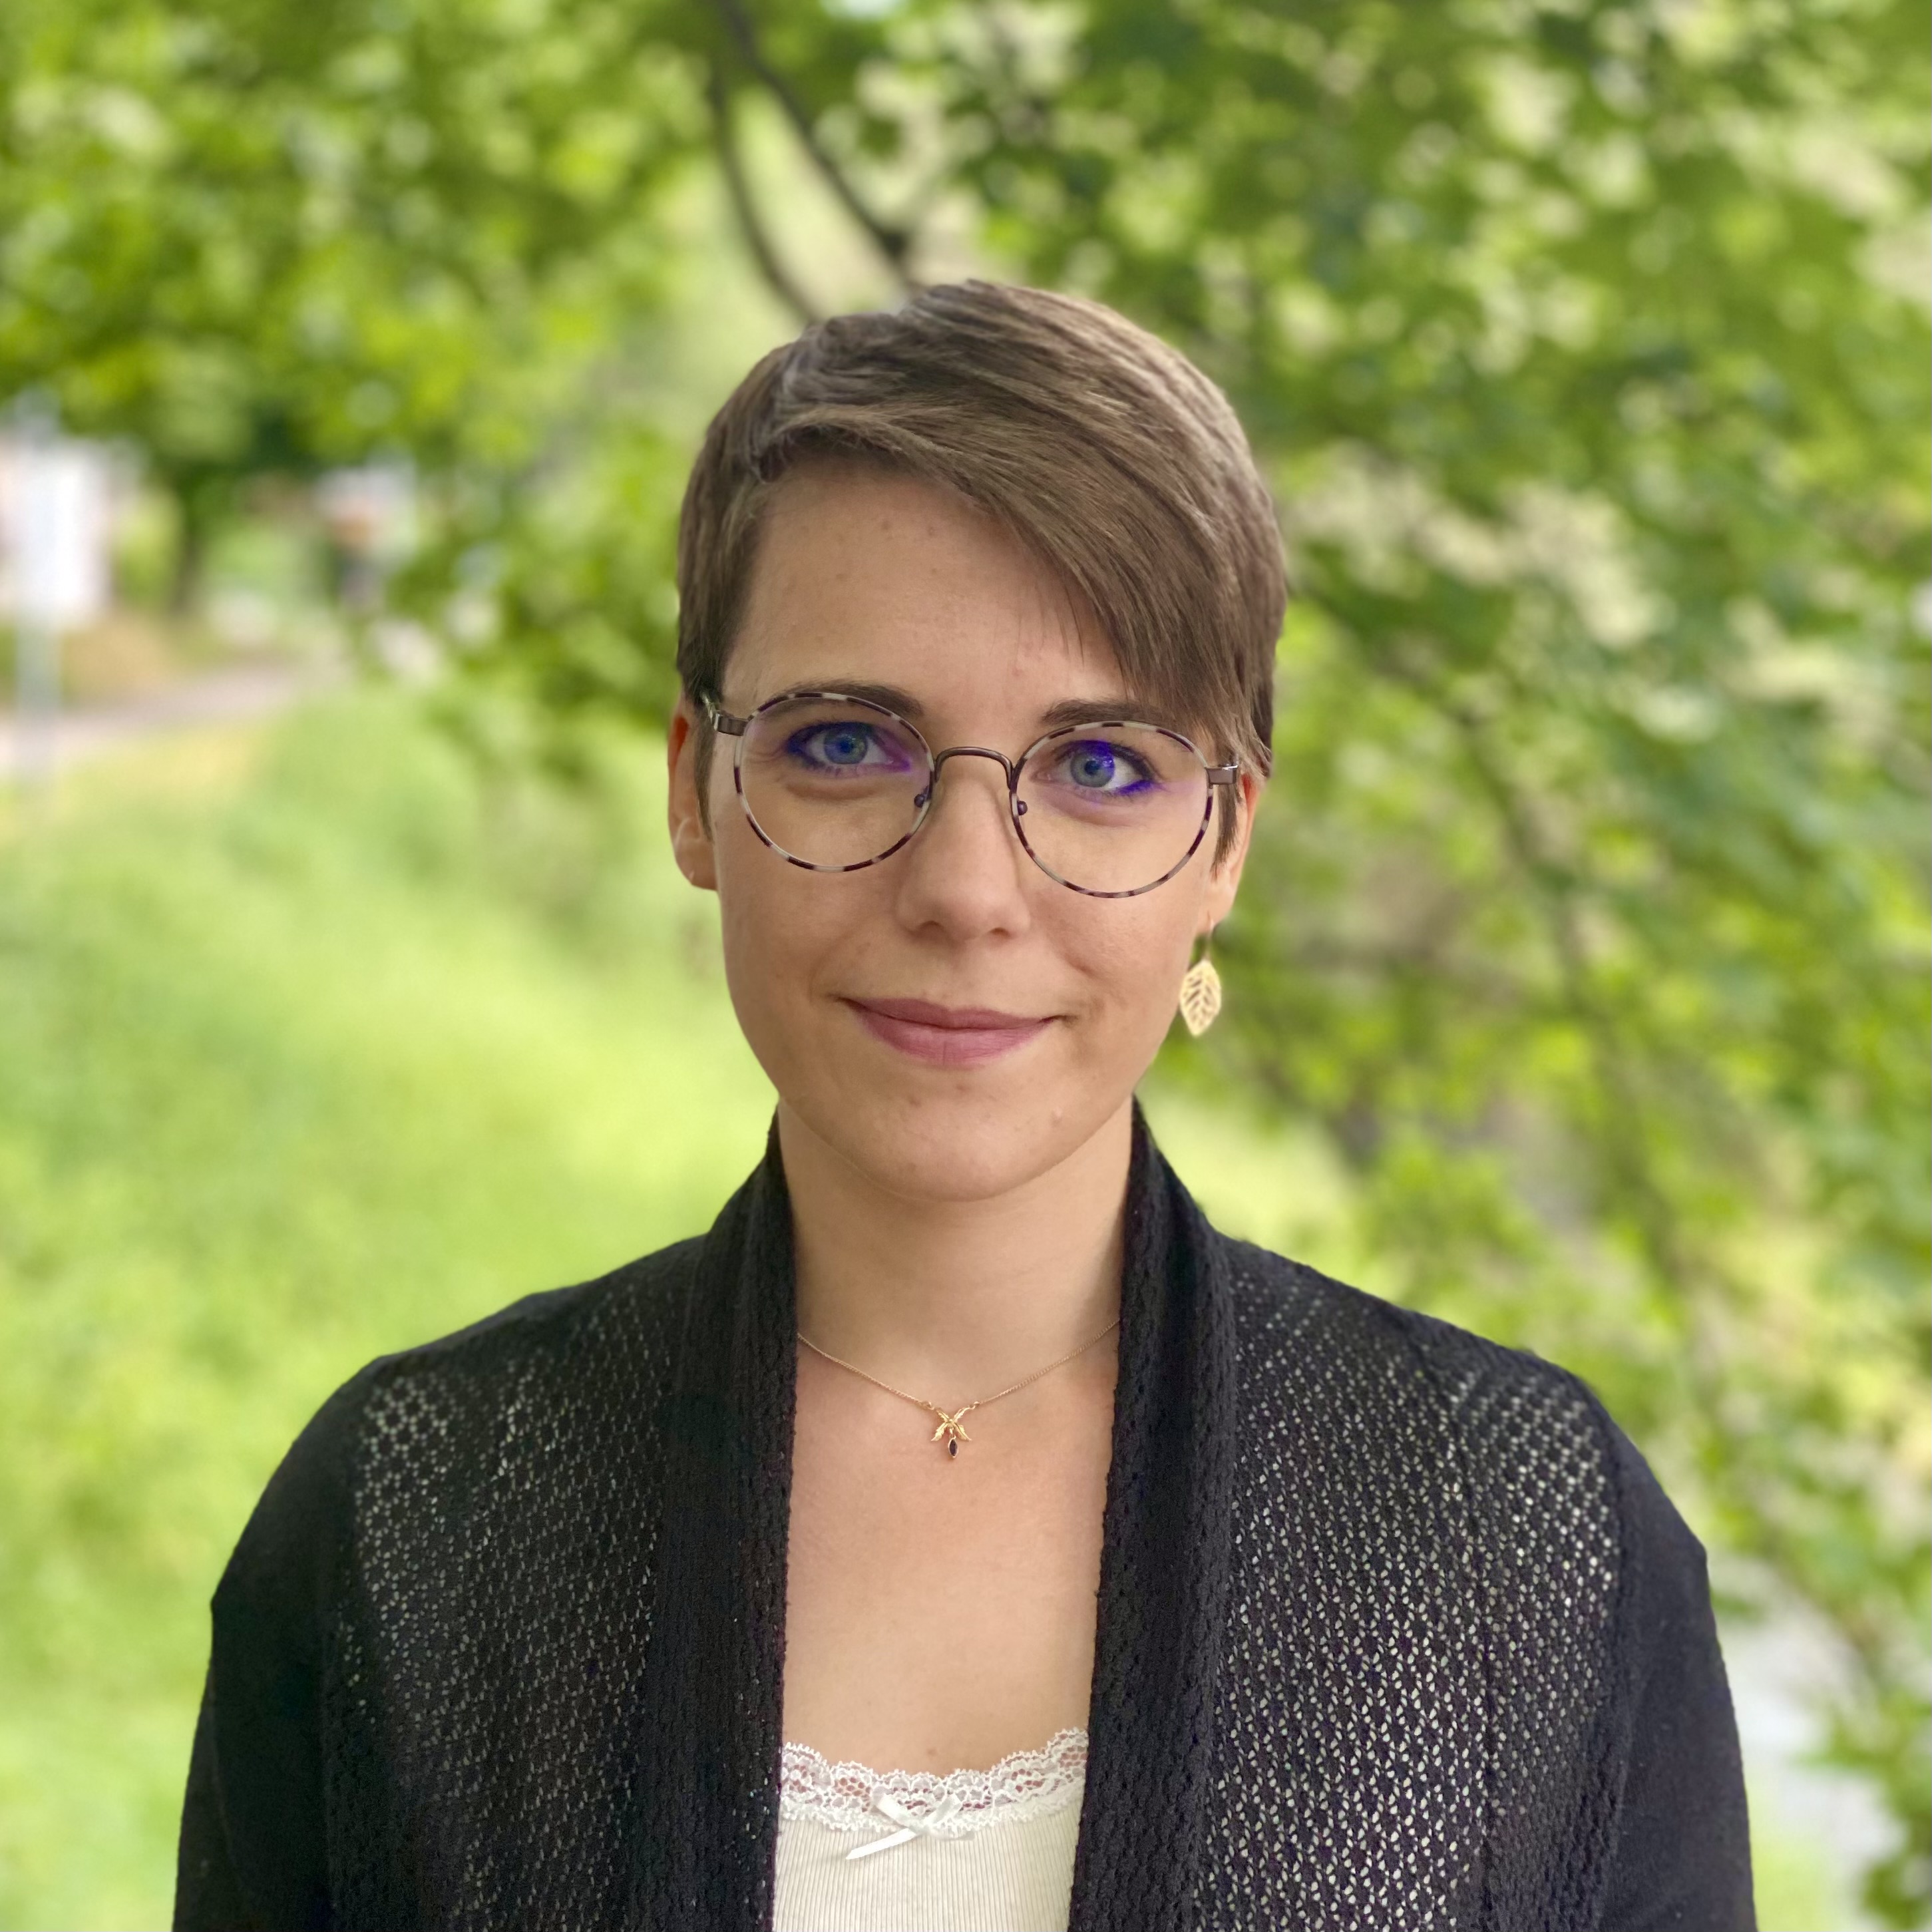 Annika Thiem, M.A. is the Honors College Scholar-In-Residence for the Fall 2022 semester